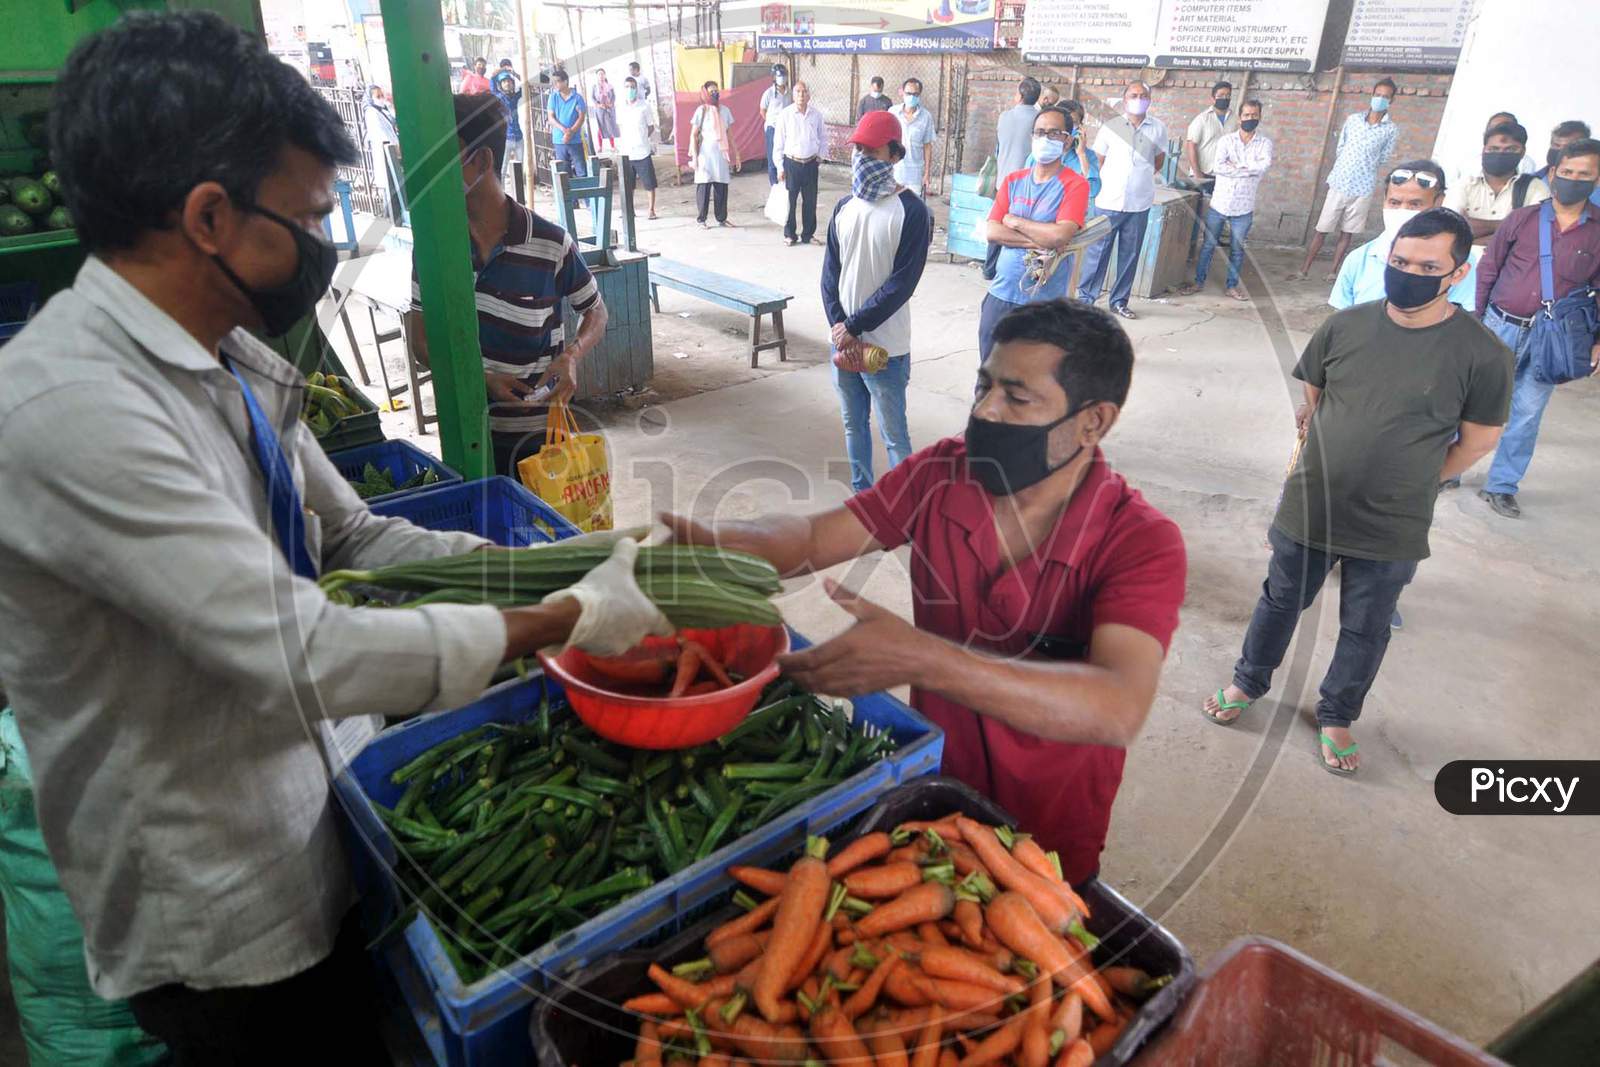 Guwahati -People Maintain Social Distance As They Stand In A Queue To Buy Vegetables, Supplied By The State Food Supply Department, During A Nationwide Lockdown In The Wake Of The Corona Virus Pandemic In Guwahati On Wednesday, 8 April 2020.